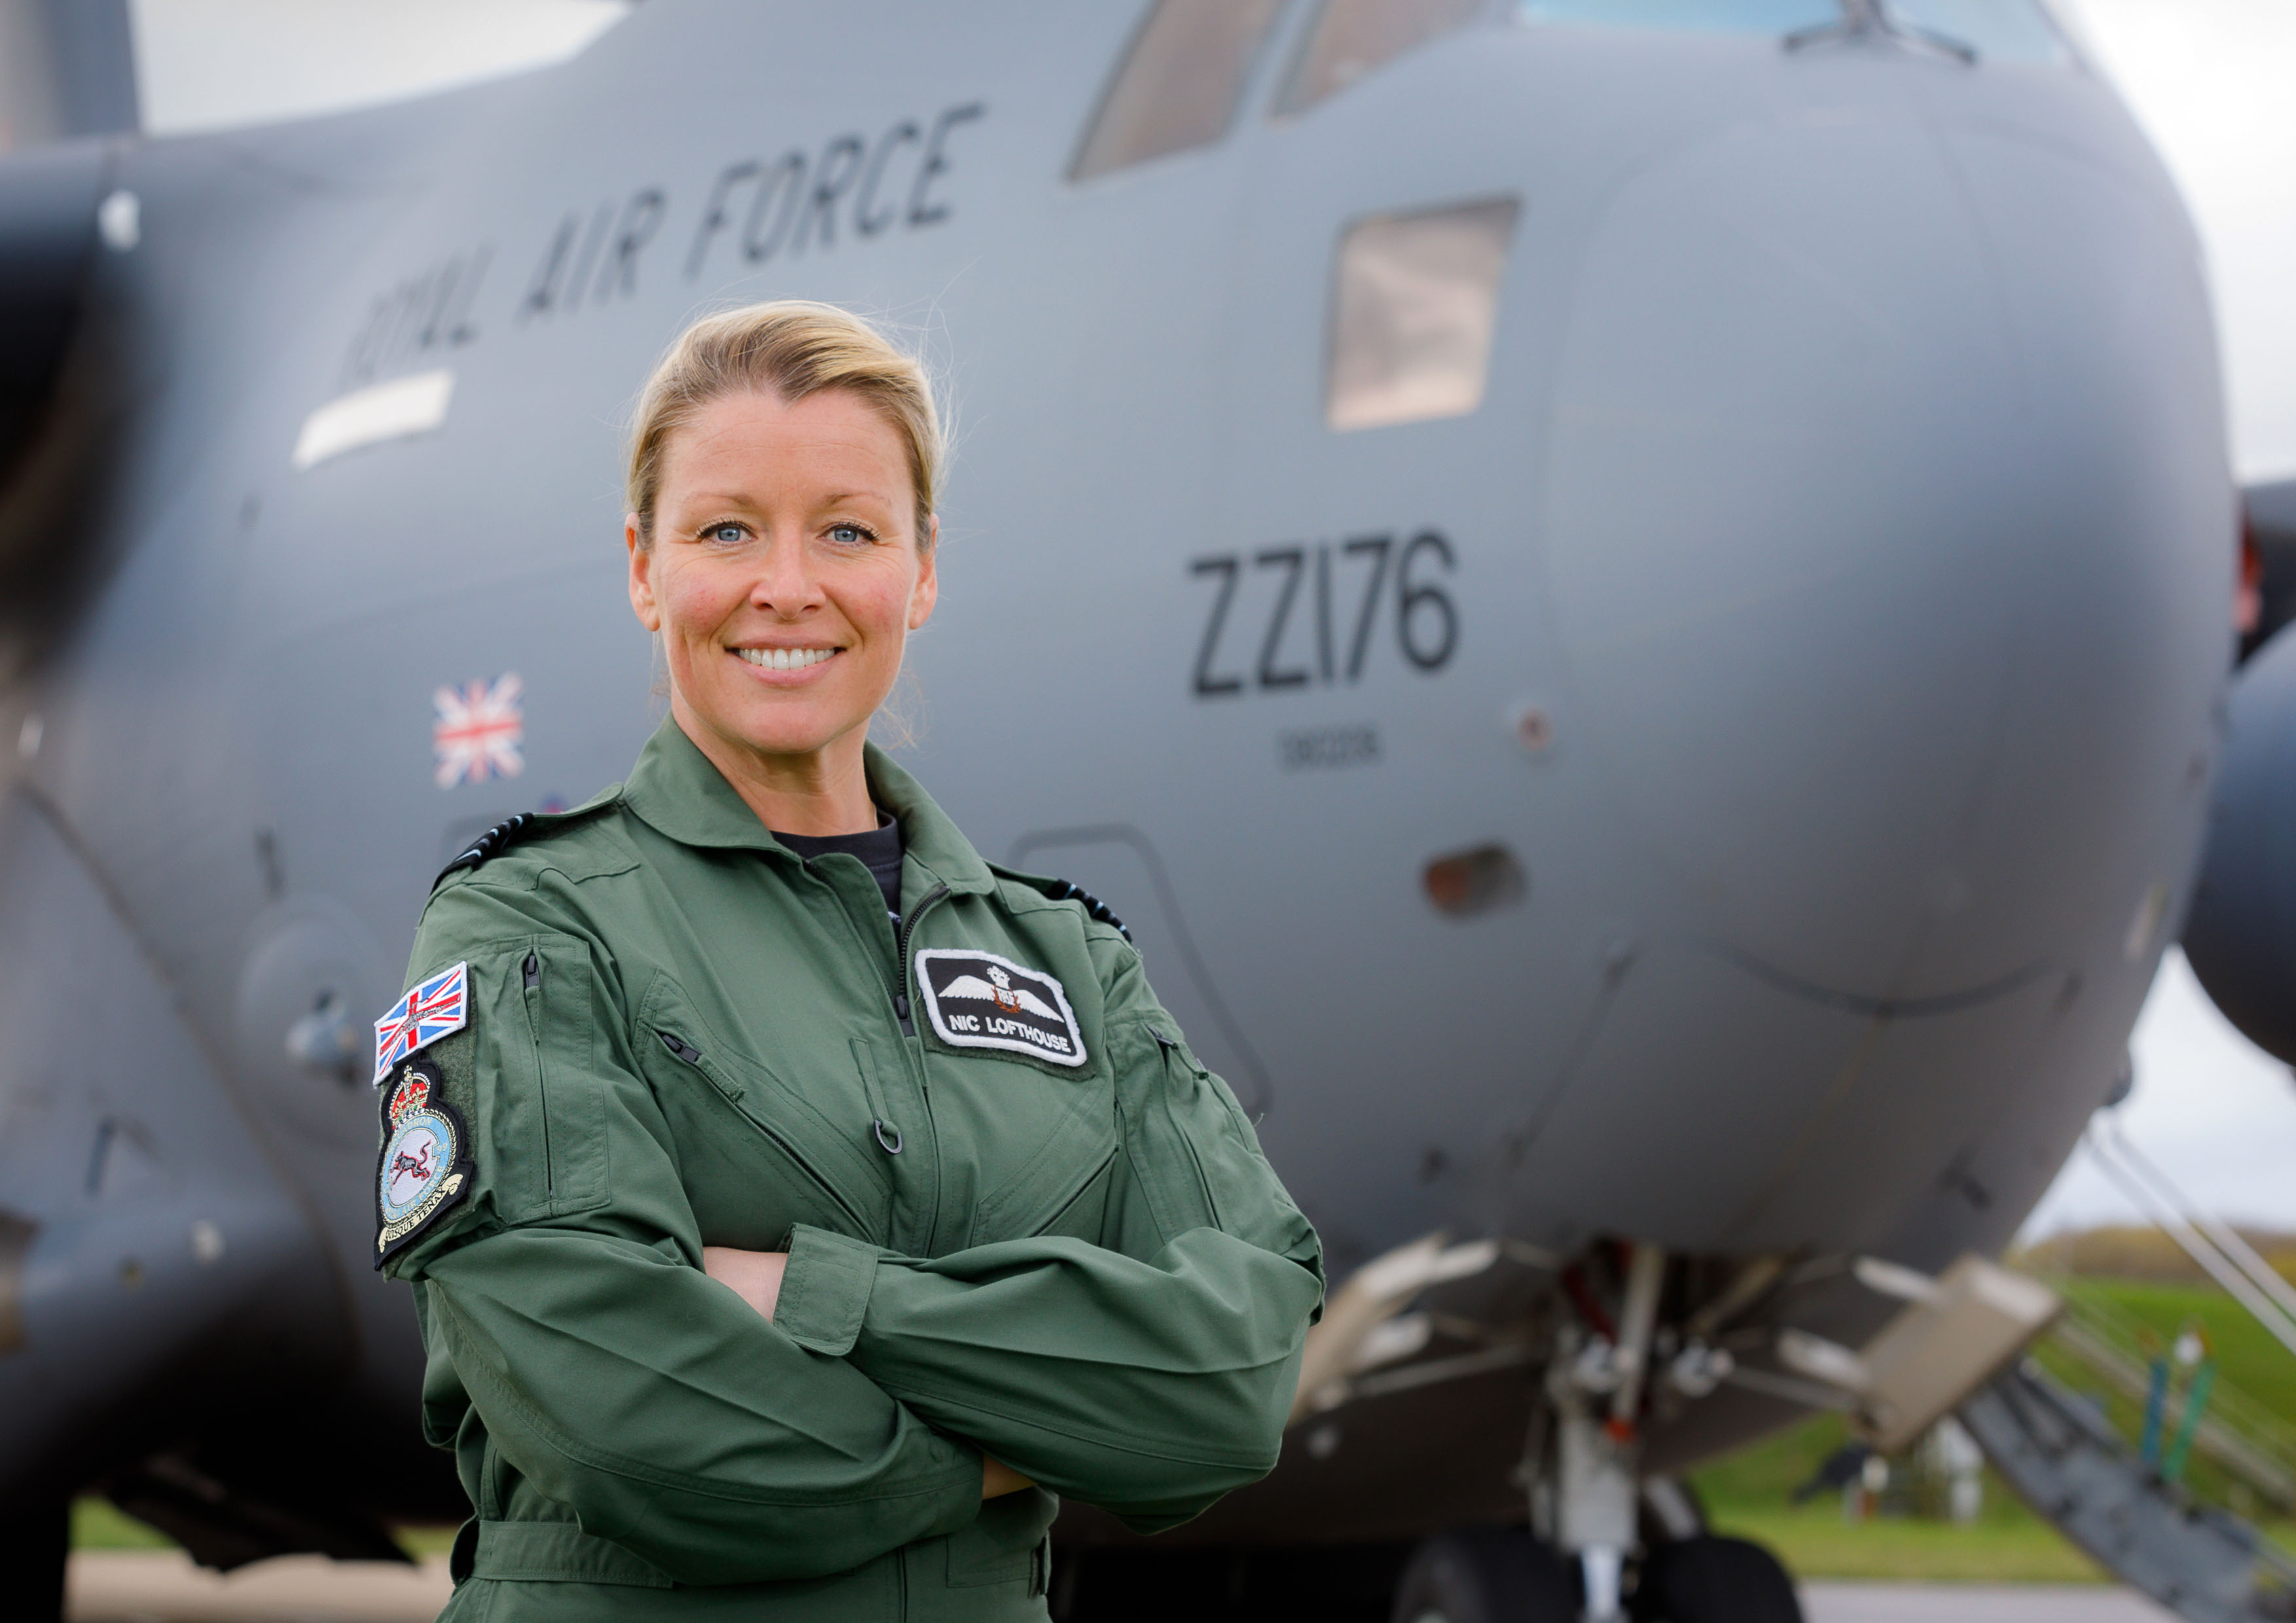 Command of Number 99 Squadron, based at RAF Brize Norton, has been officially handed over from Wing Commander Will Essex to Wing Commander Nikki Lofthouse, who becomes the first female commander of the Squadron, now the largest in the Royal Air Force.